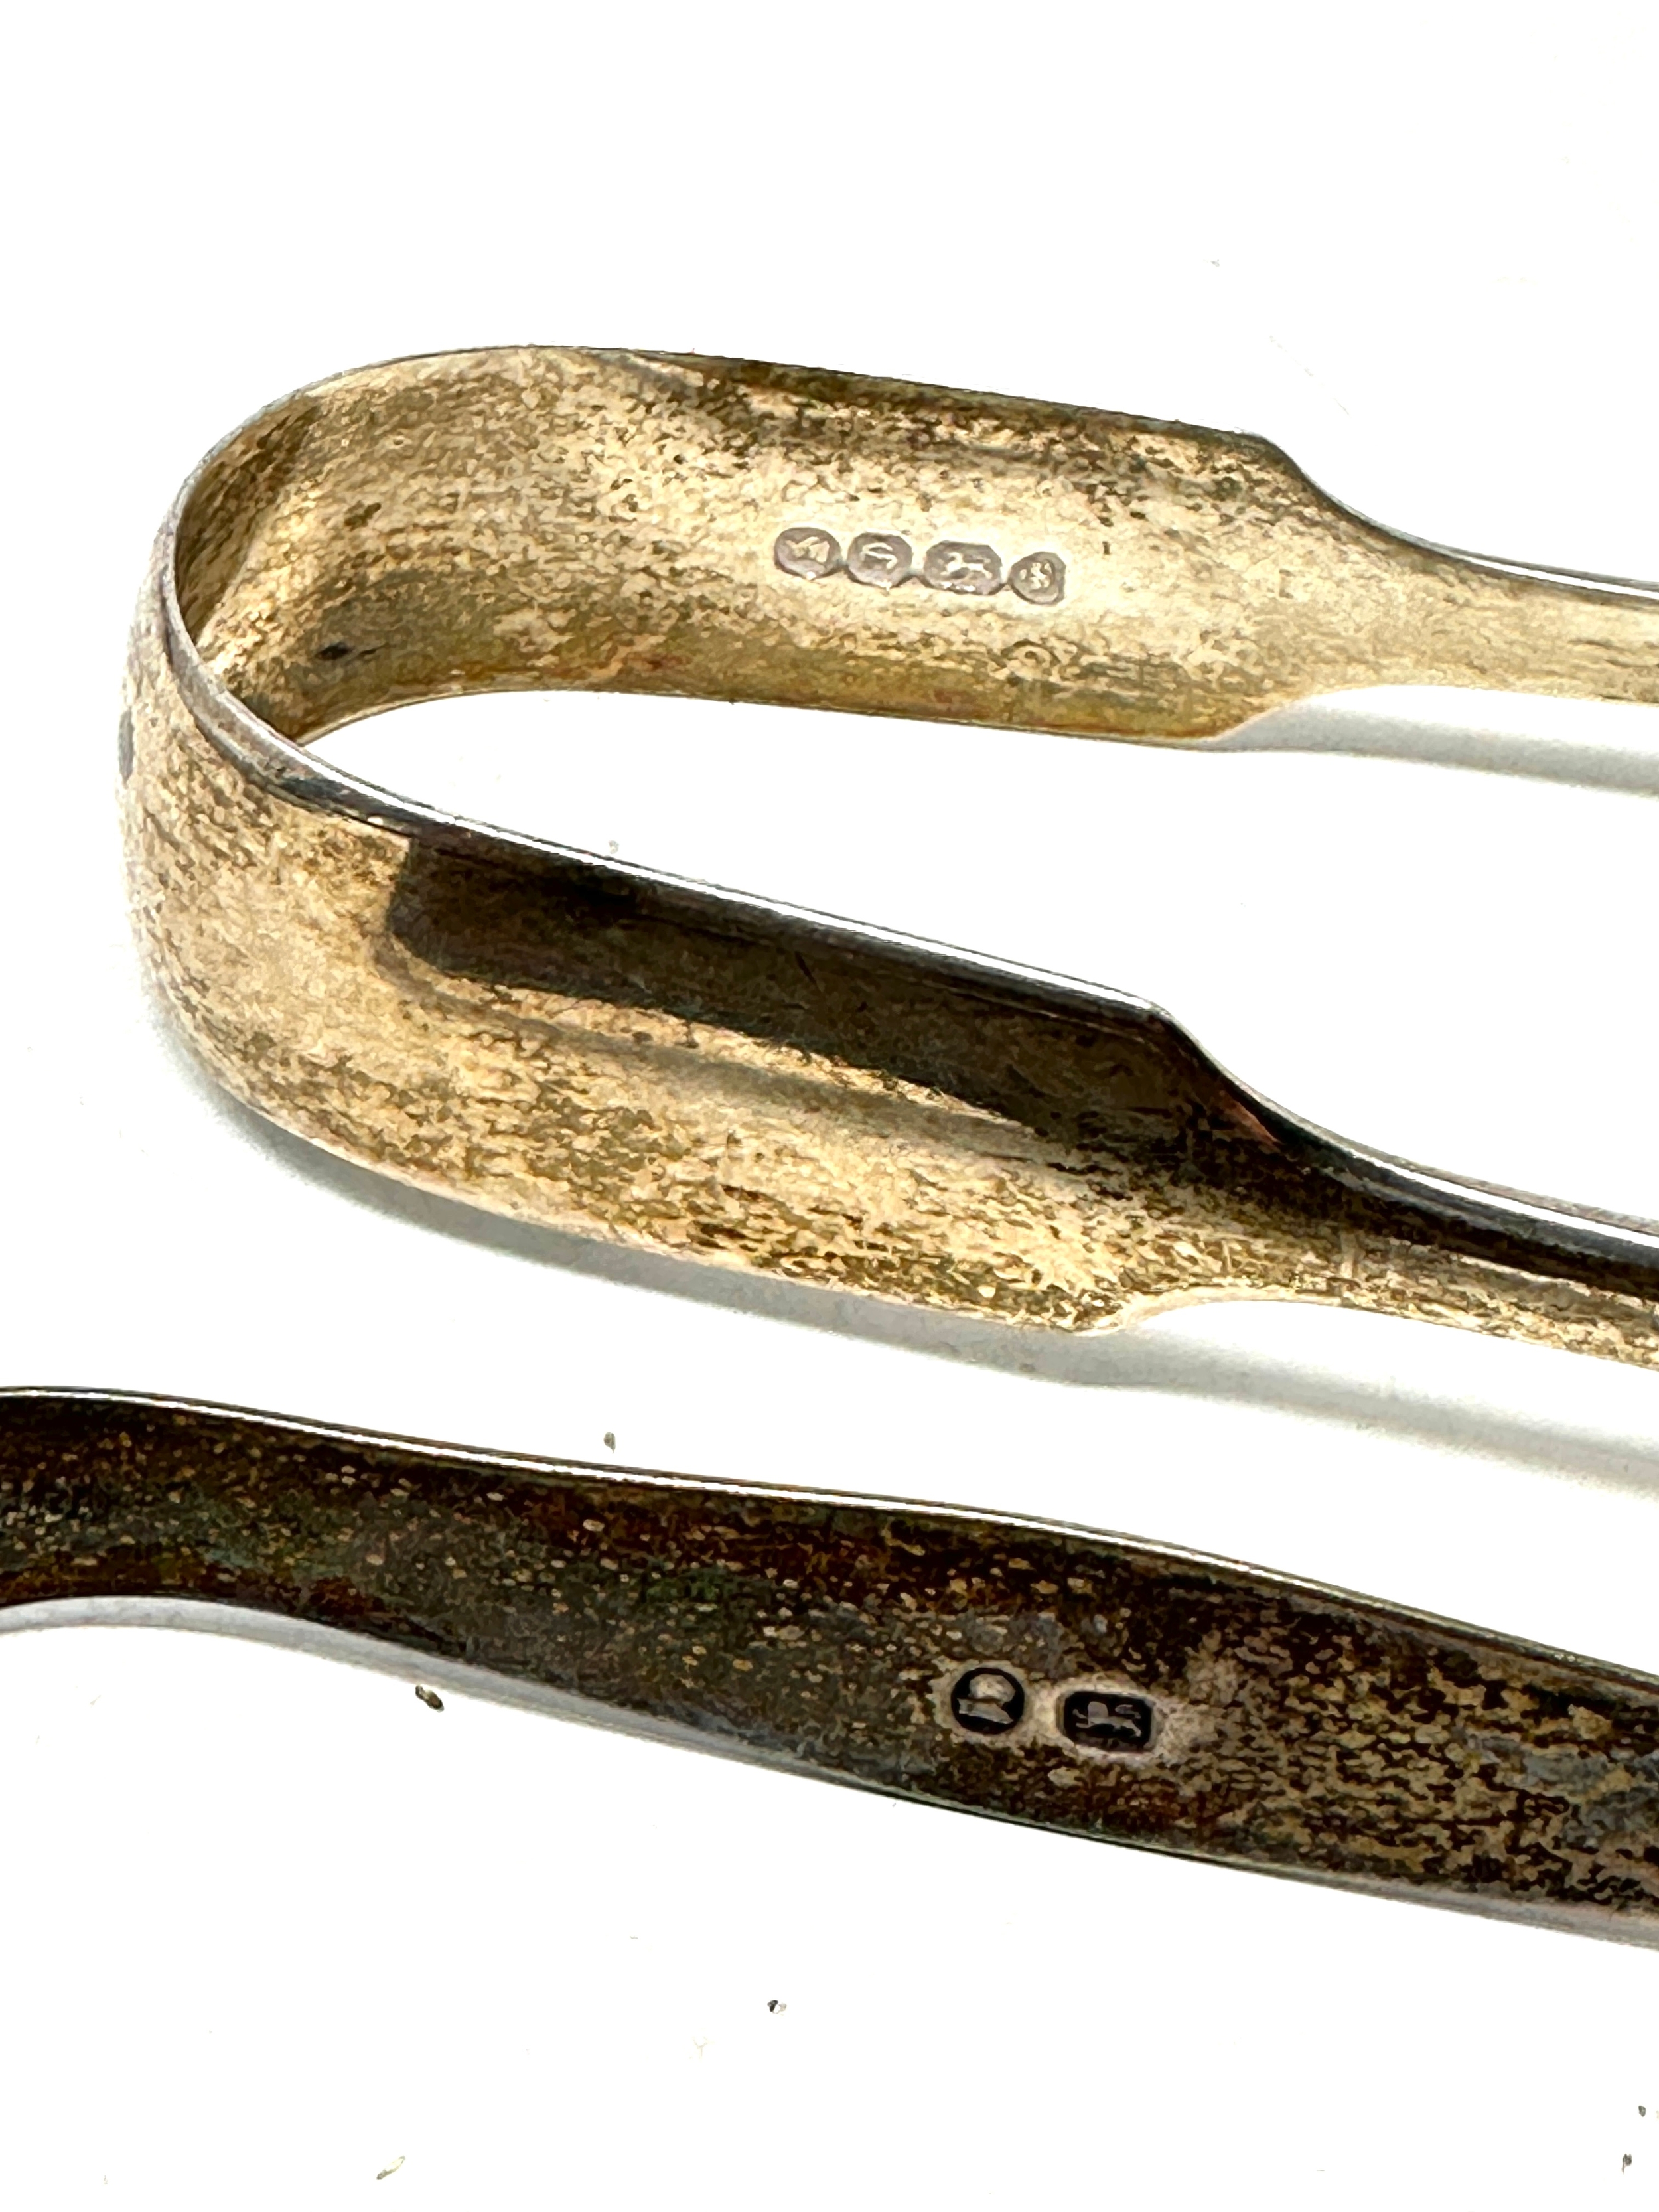 2 antique silver sugar tongs - Image 2 of 3